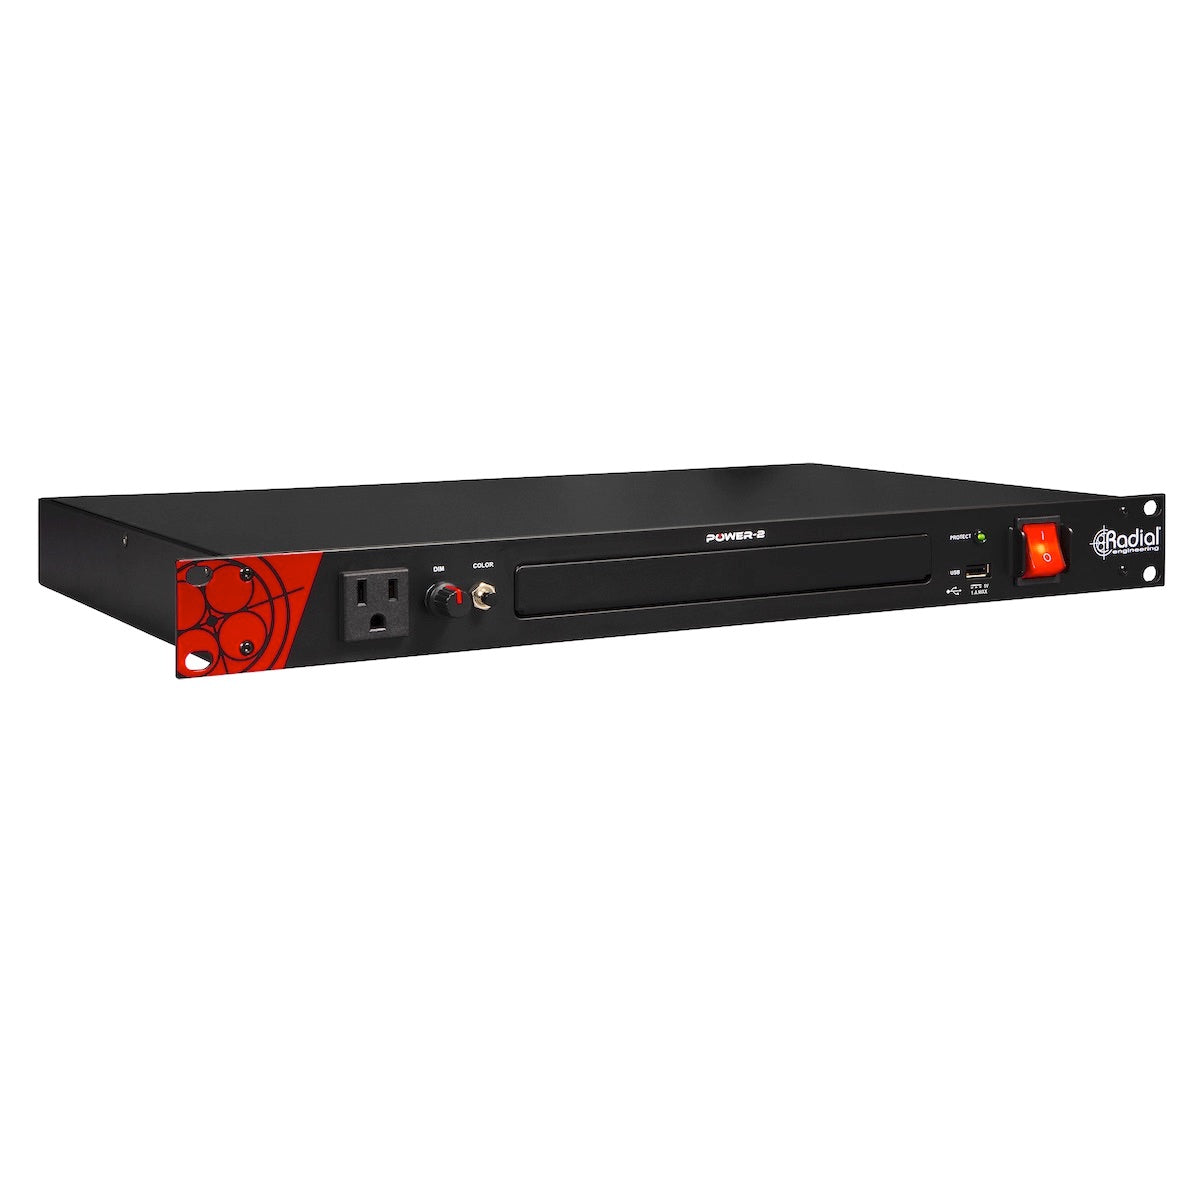 Radial Power-2 Rackmount Power Conditioner Surge Suppressor with LED Lighting, left angled view